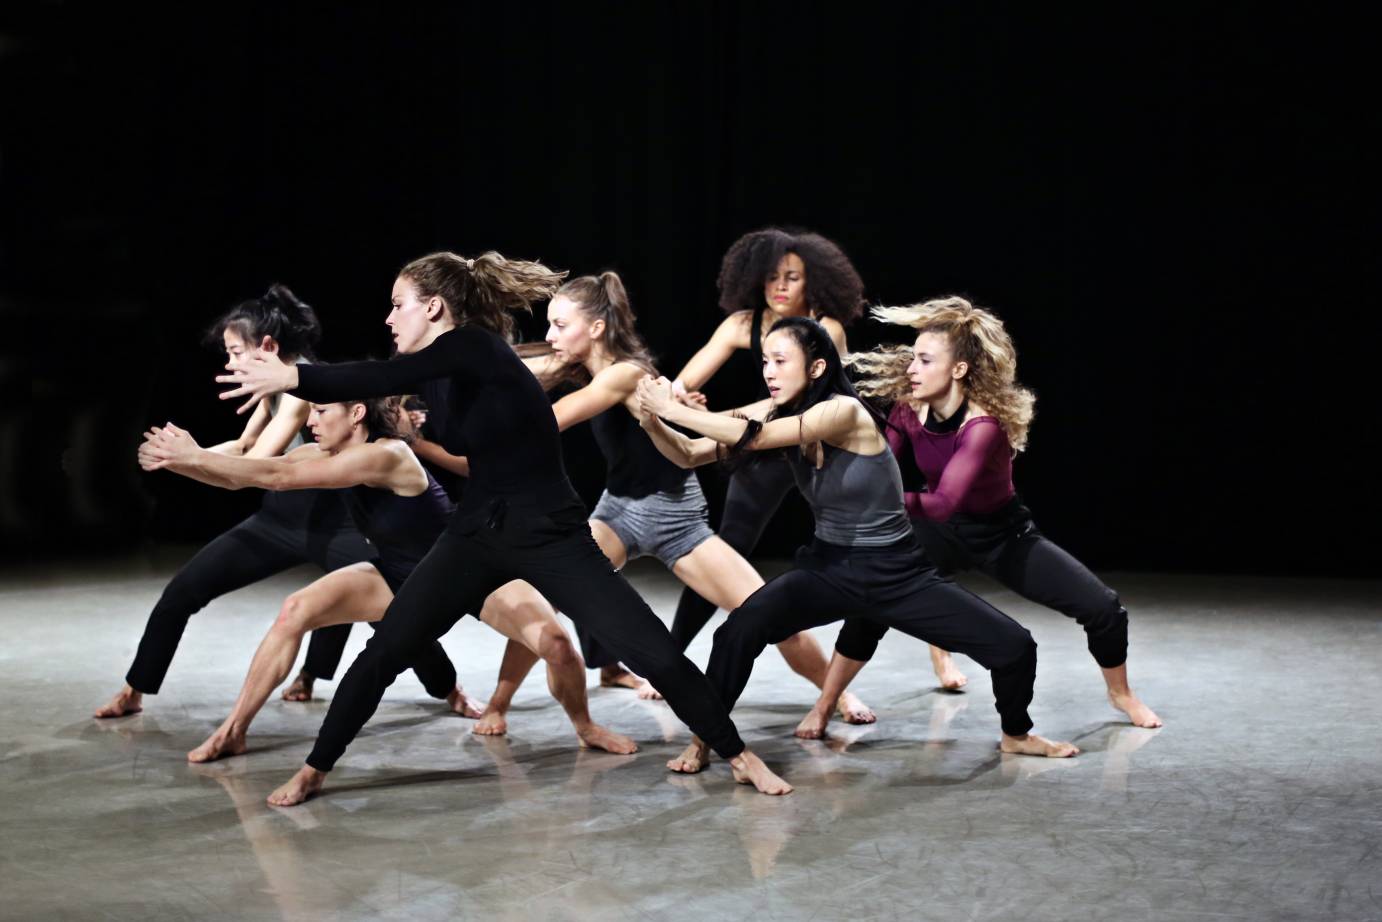 Group of female dancers clasp their hands while looking fierce